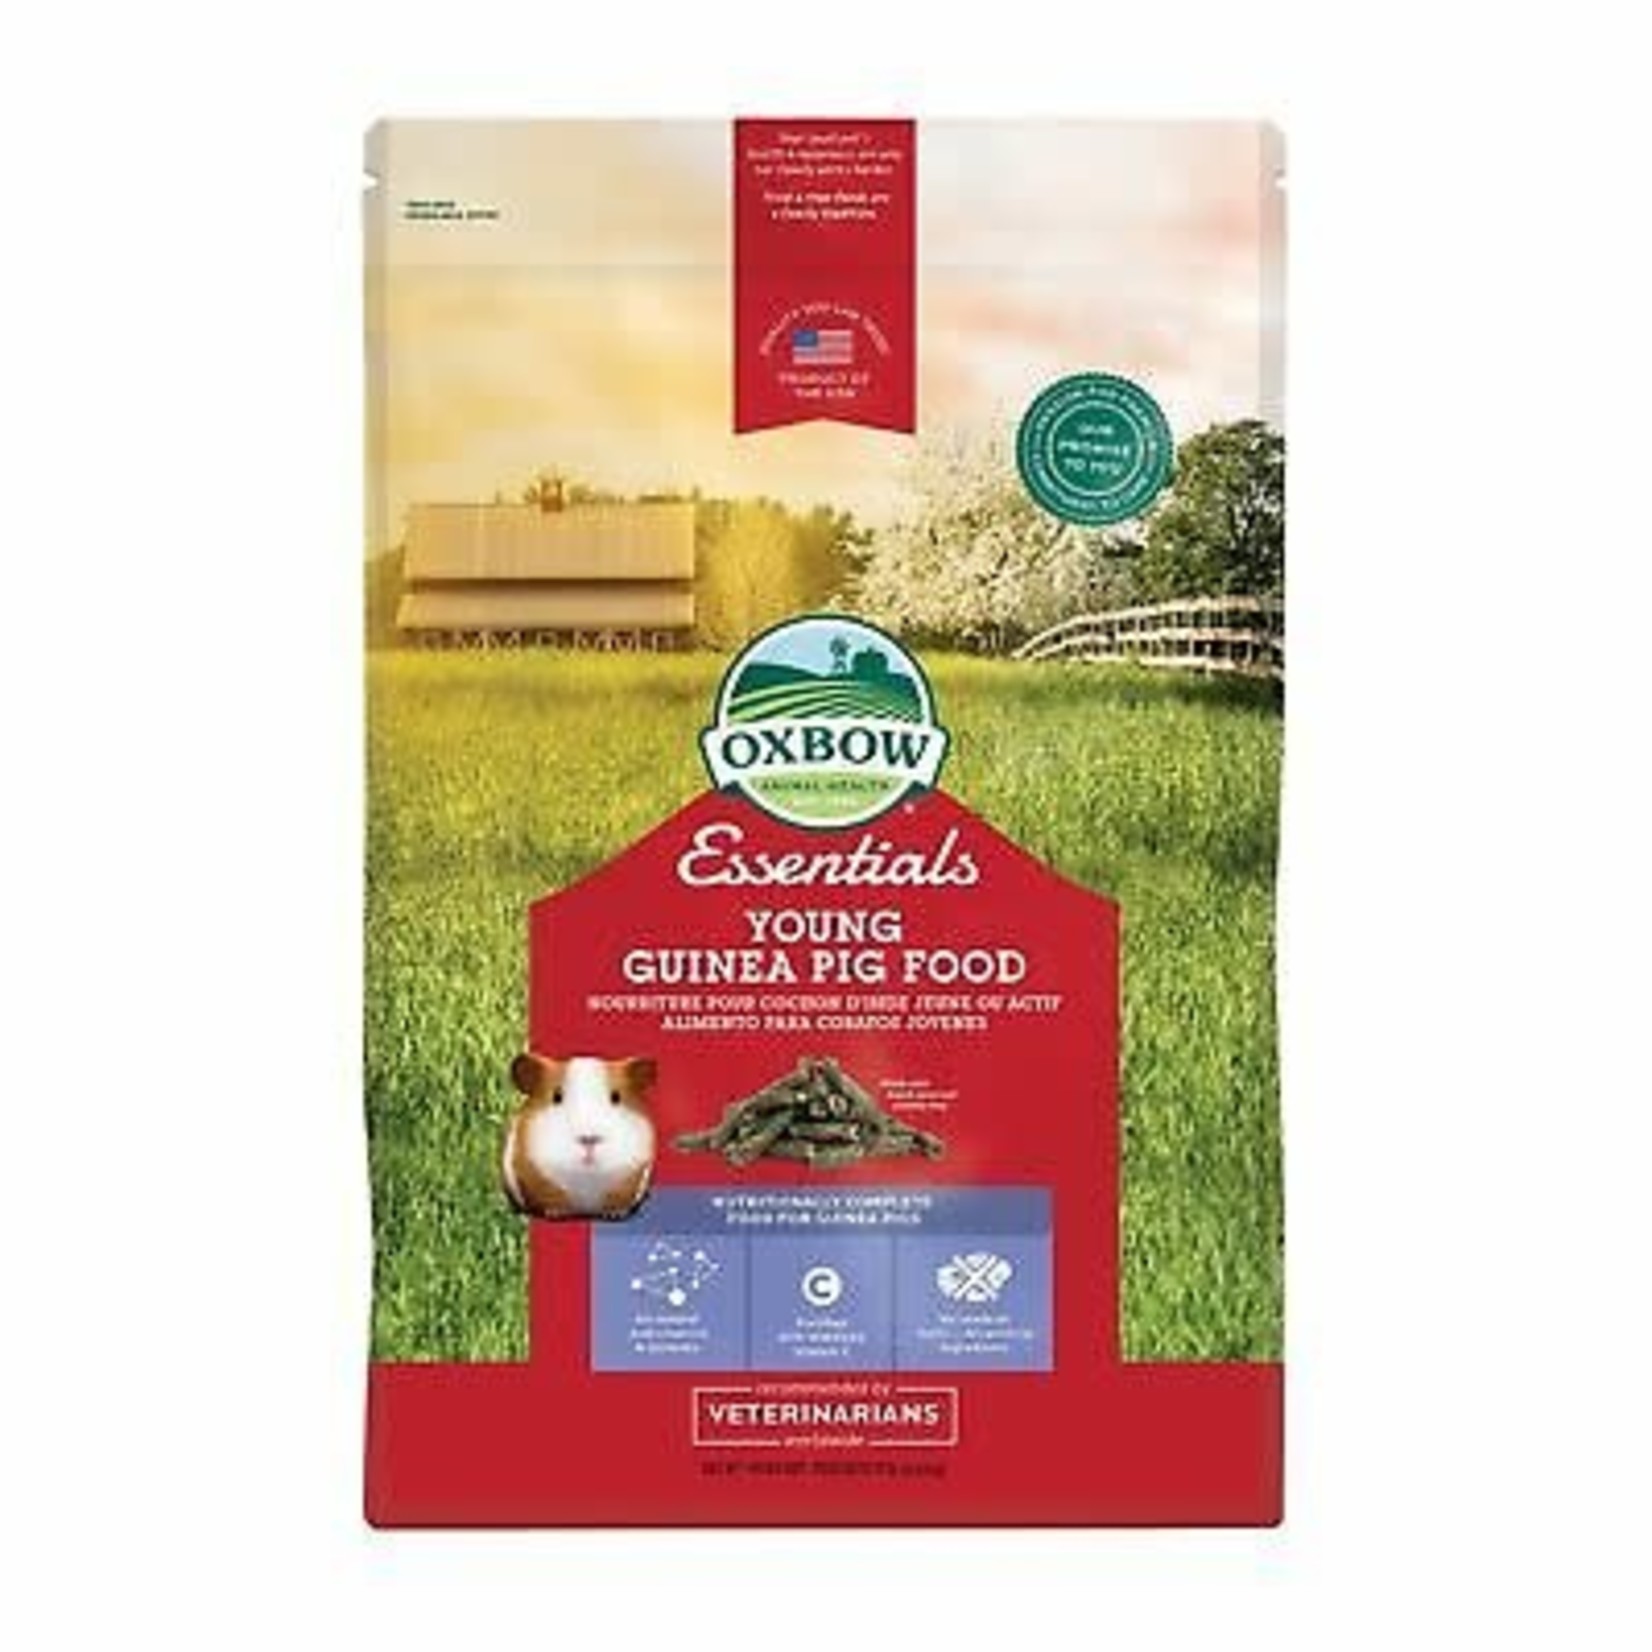 OXBOW ANIMAL HEALTH OXBOW Essentials Young Guinea Pig Food 10LB